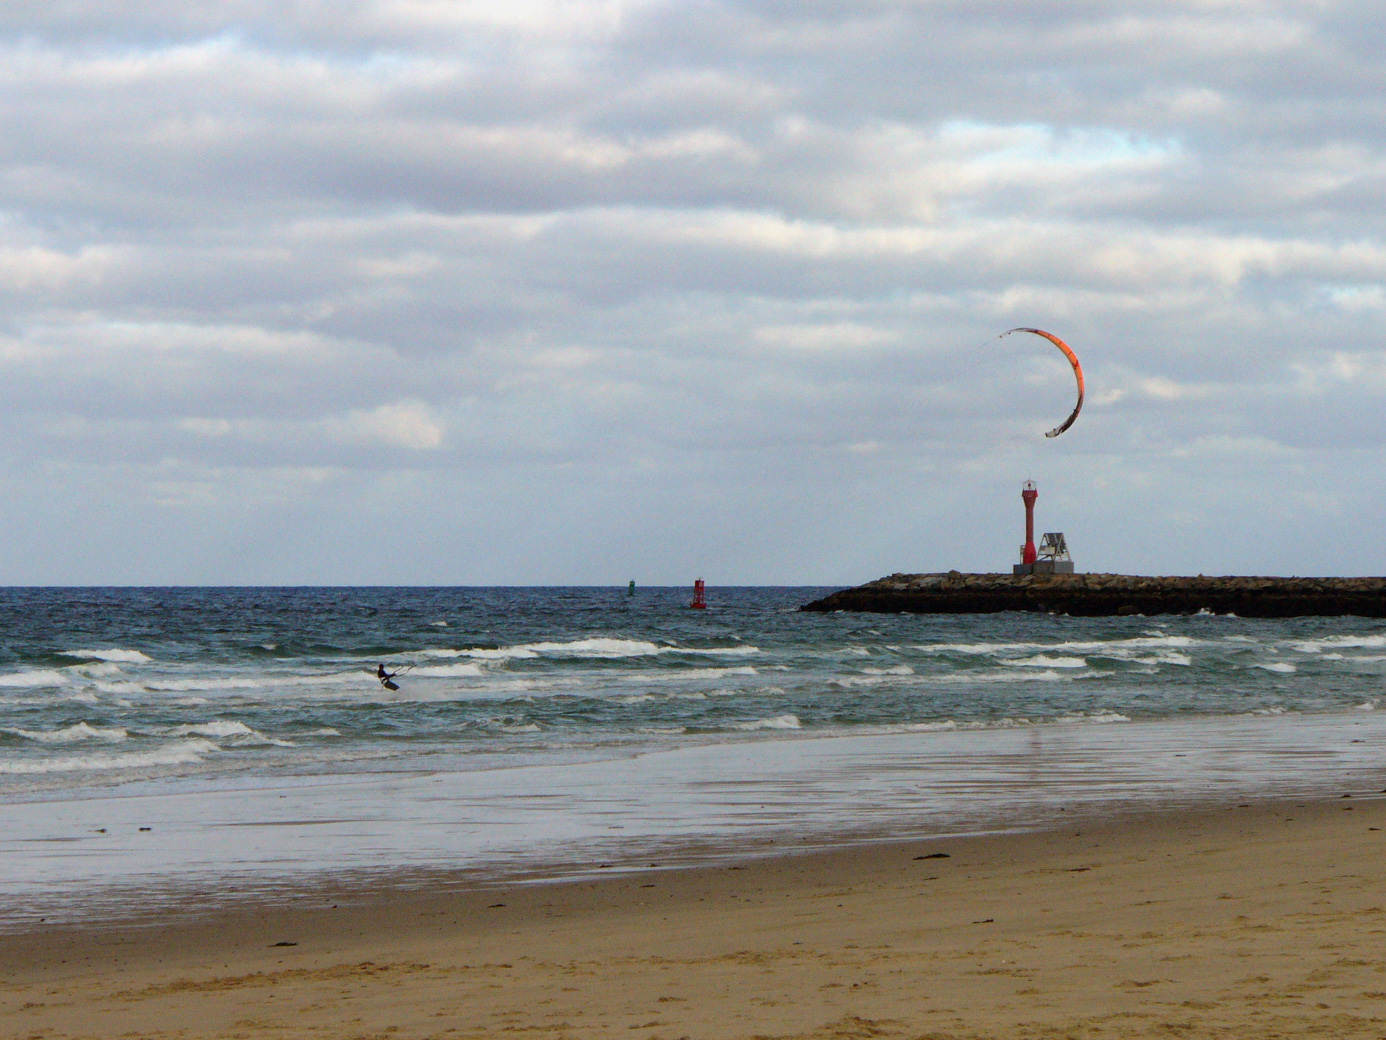 Man in wetsuit windsurfing at Scusset Beach with the breakwater to the left in the photo